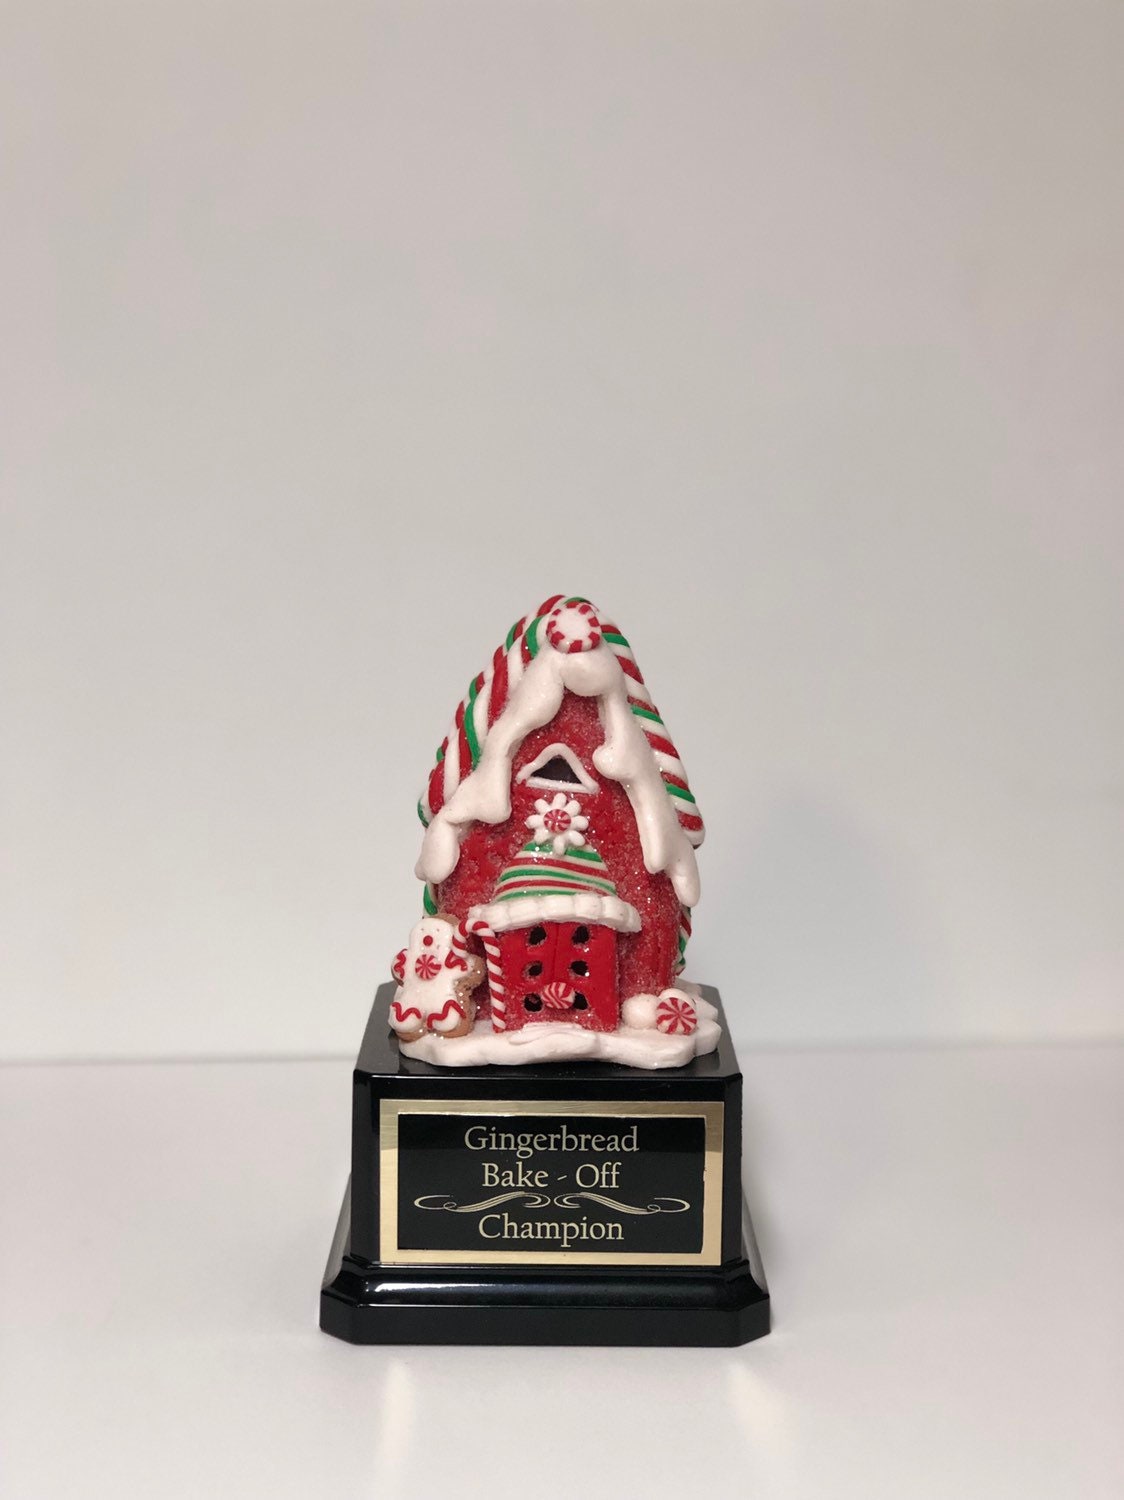 Gingerbread House Decorating Contest Cookie Bake Off Trophy Ugly Sweater Trophy Snowman Christmas Cookie Gingerbread Man Christmas Decor